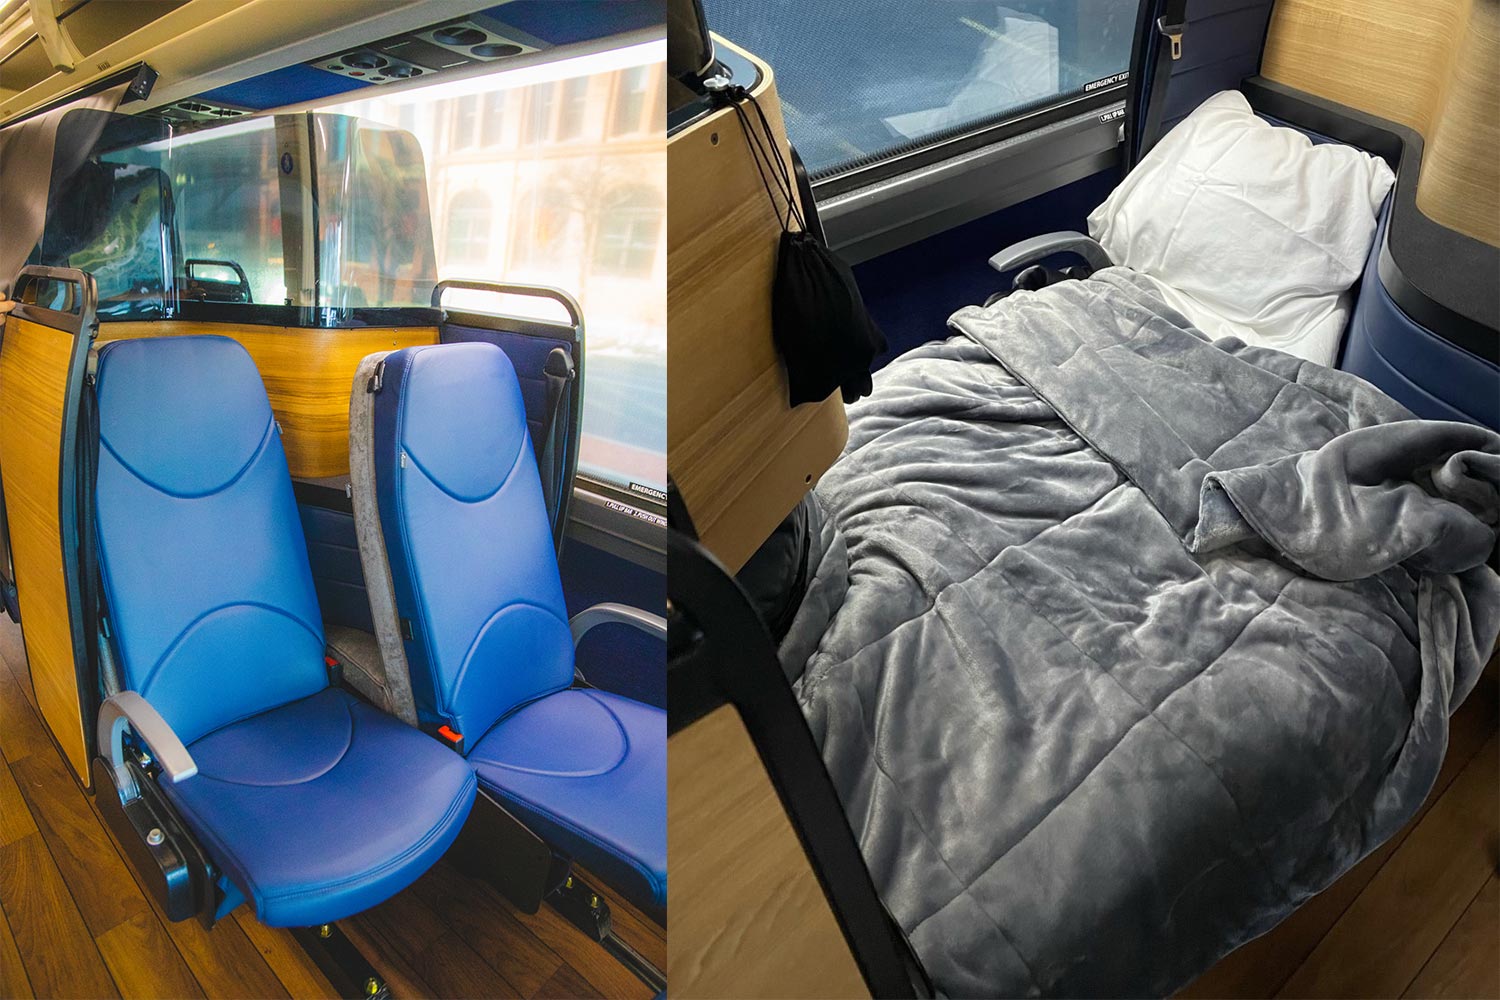 The seats on a Napaway bus, which can be used for sitting upright or folded down into a bed